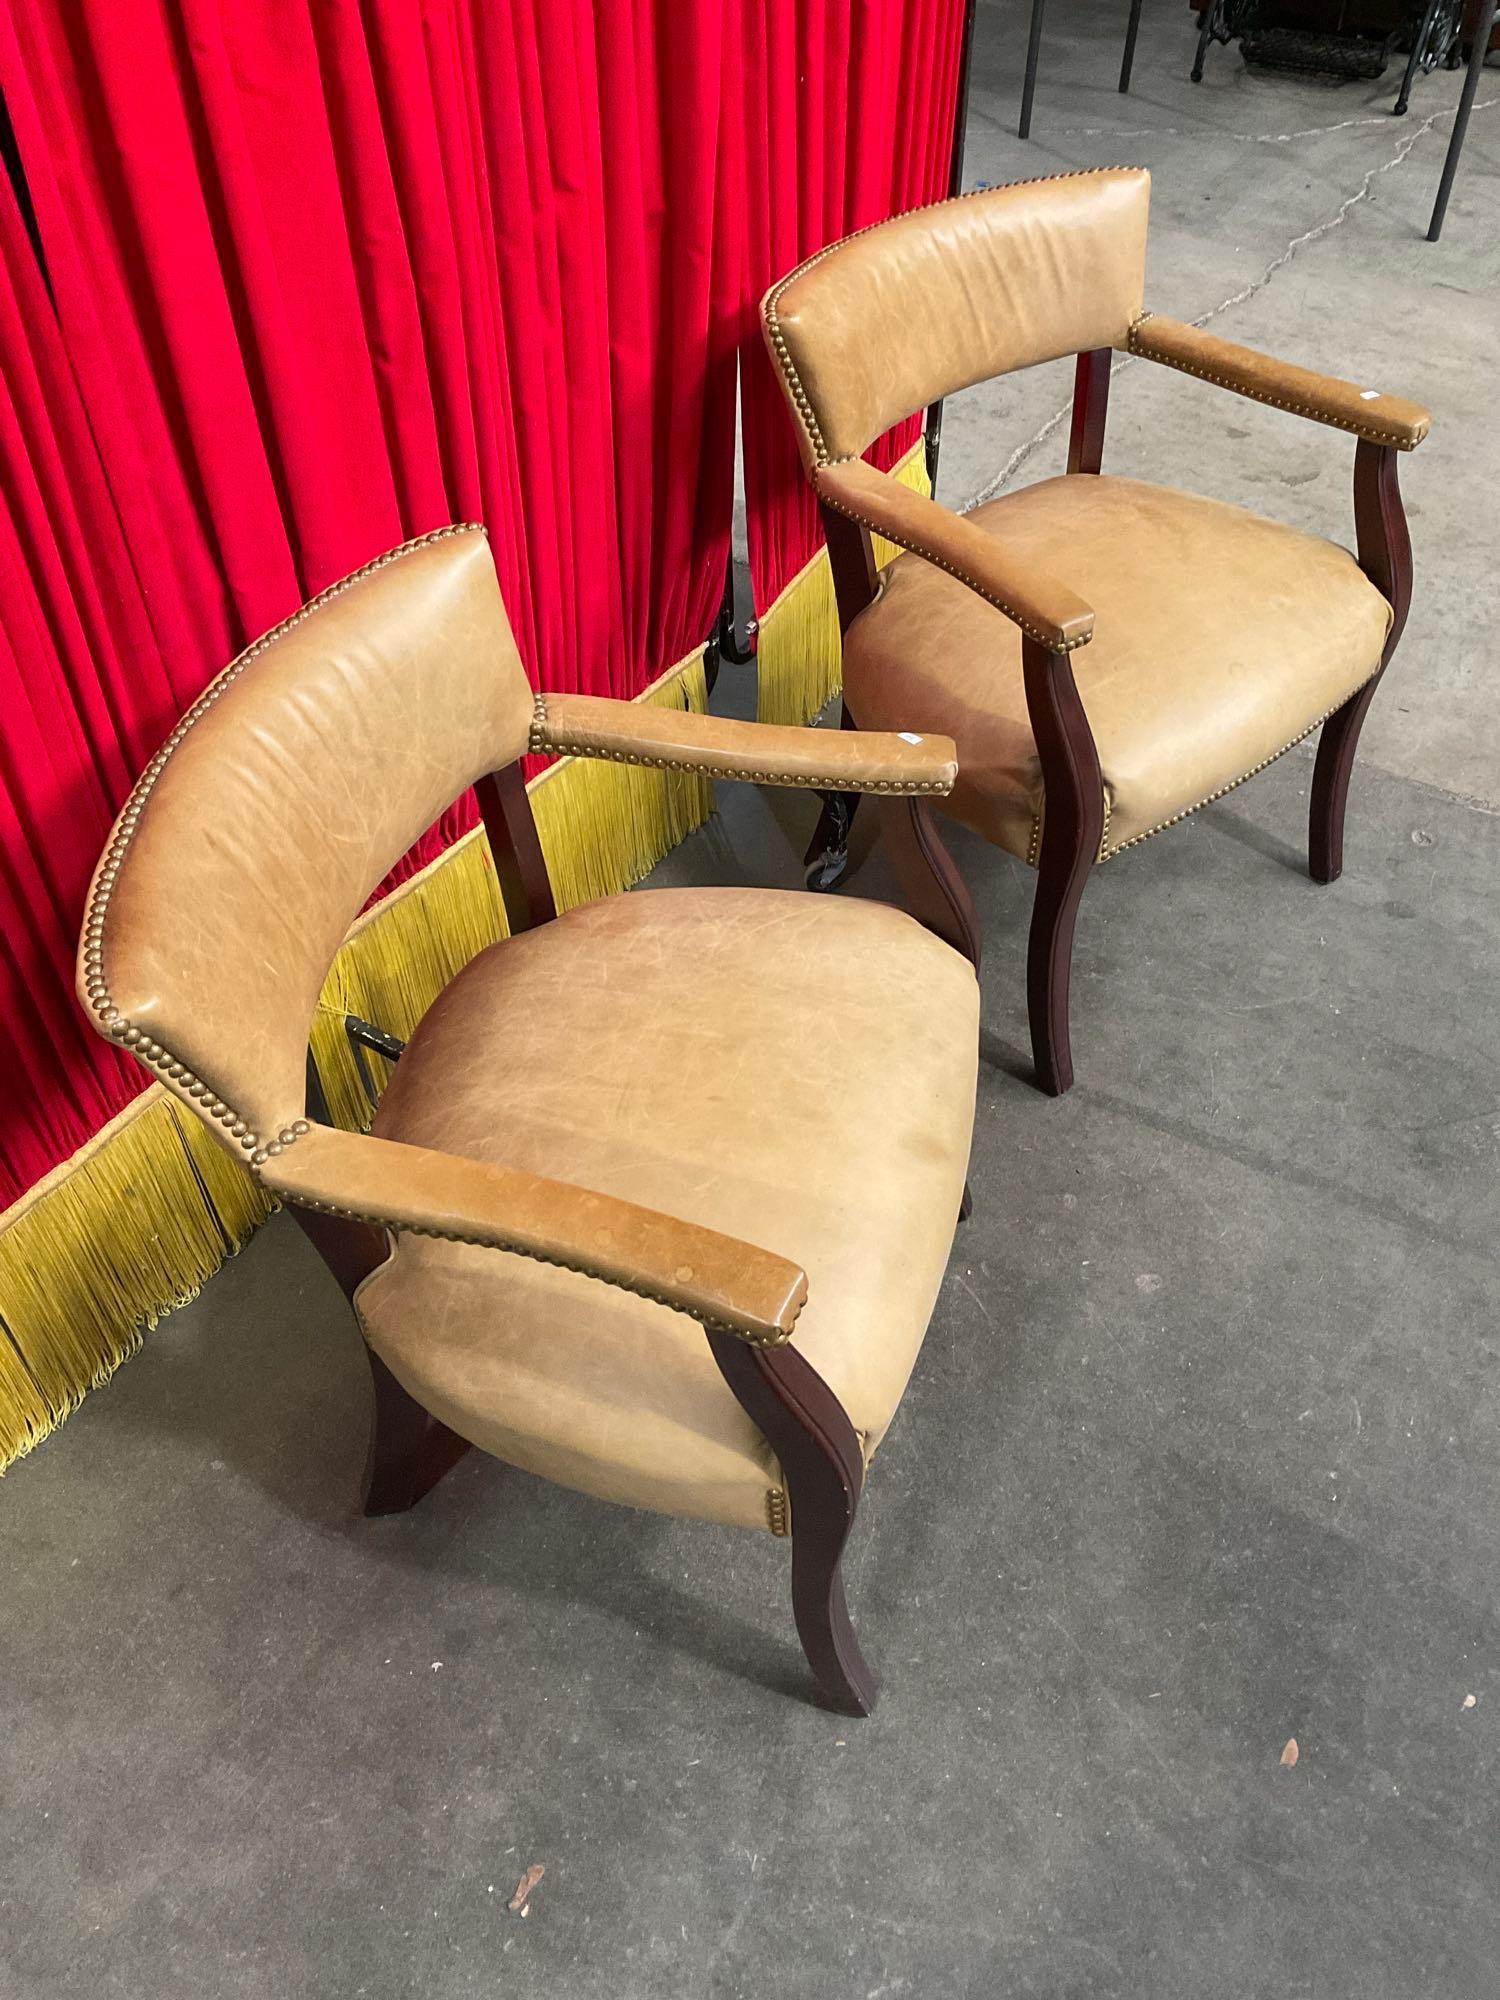 Pair of Vintage Thomasville Wooden Armchairs w/ Tan Leather Upholstery & Brass Studs. See pics.